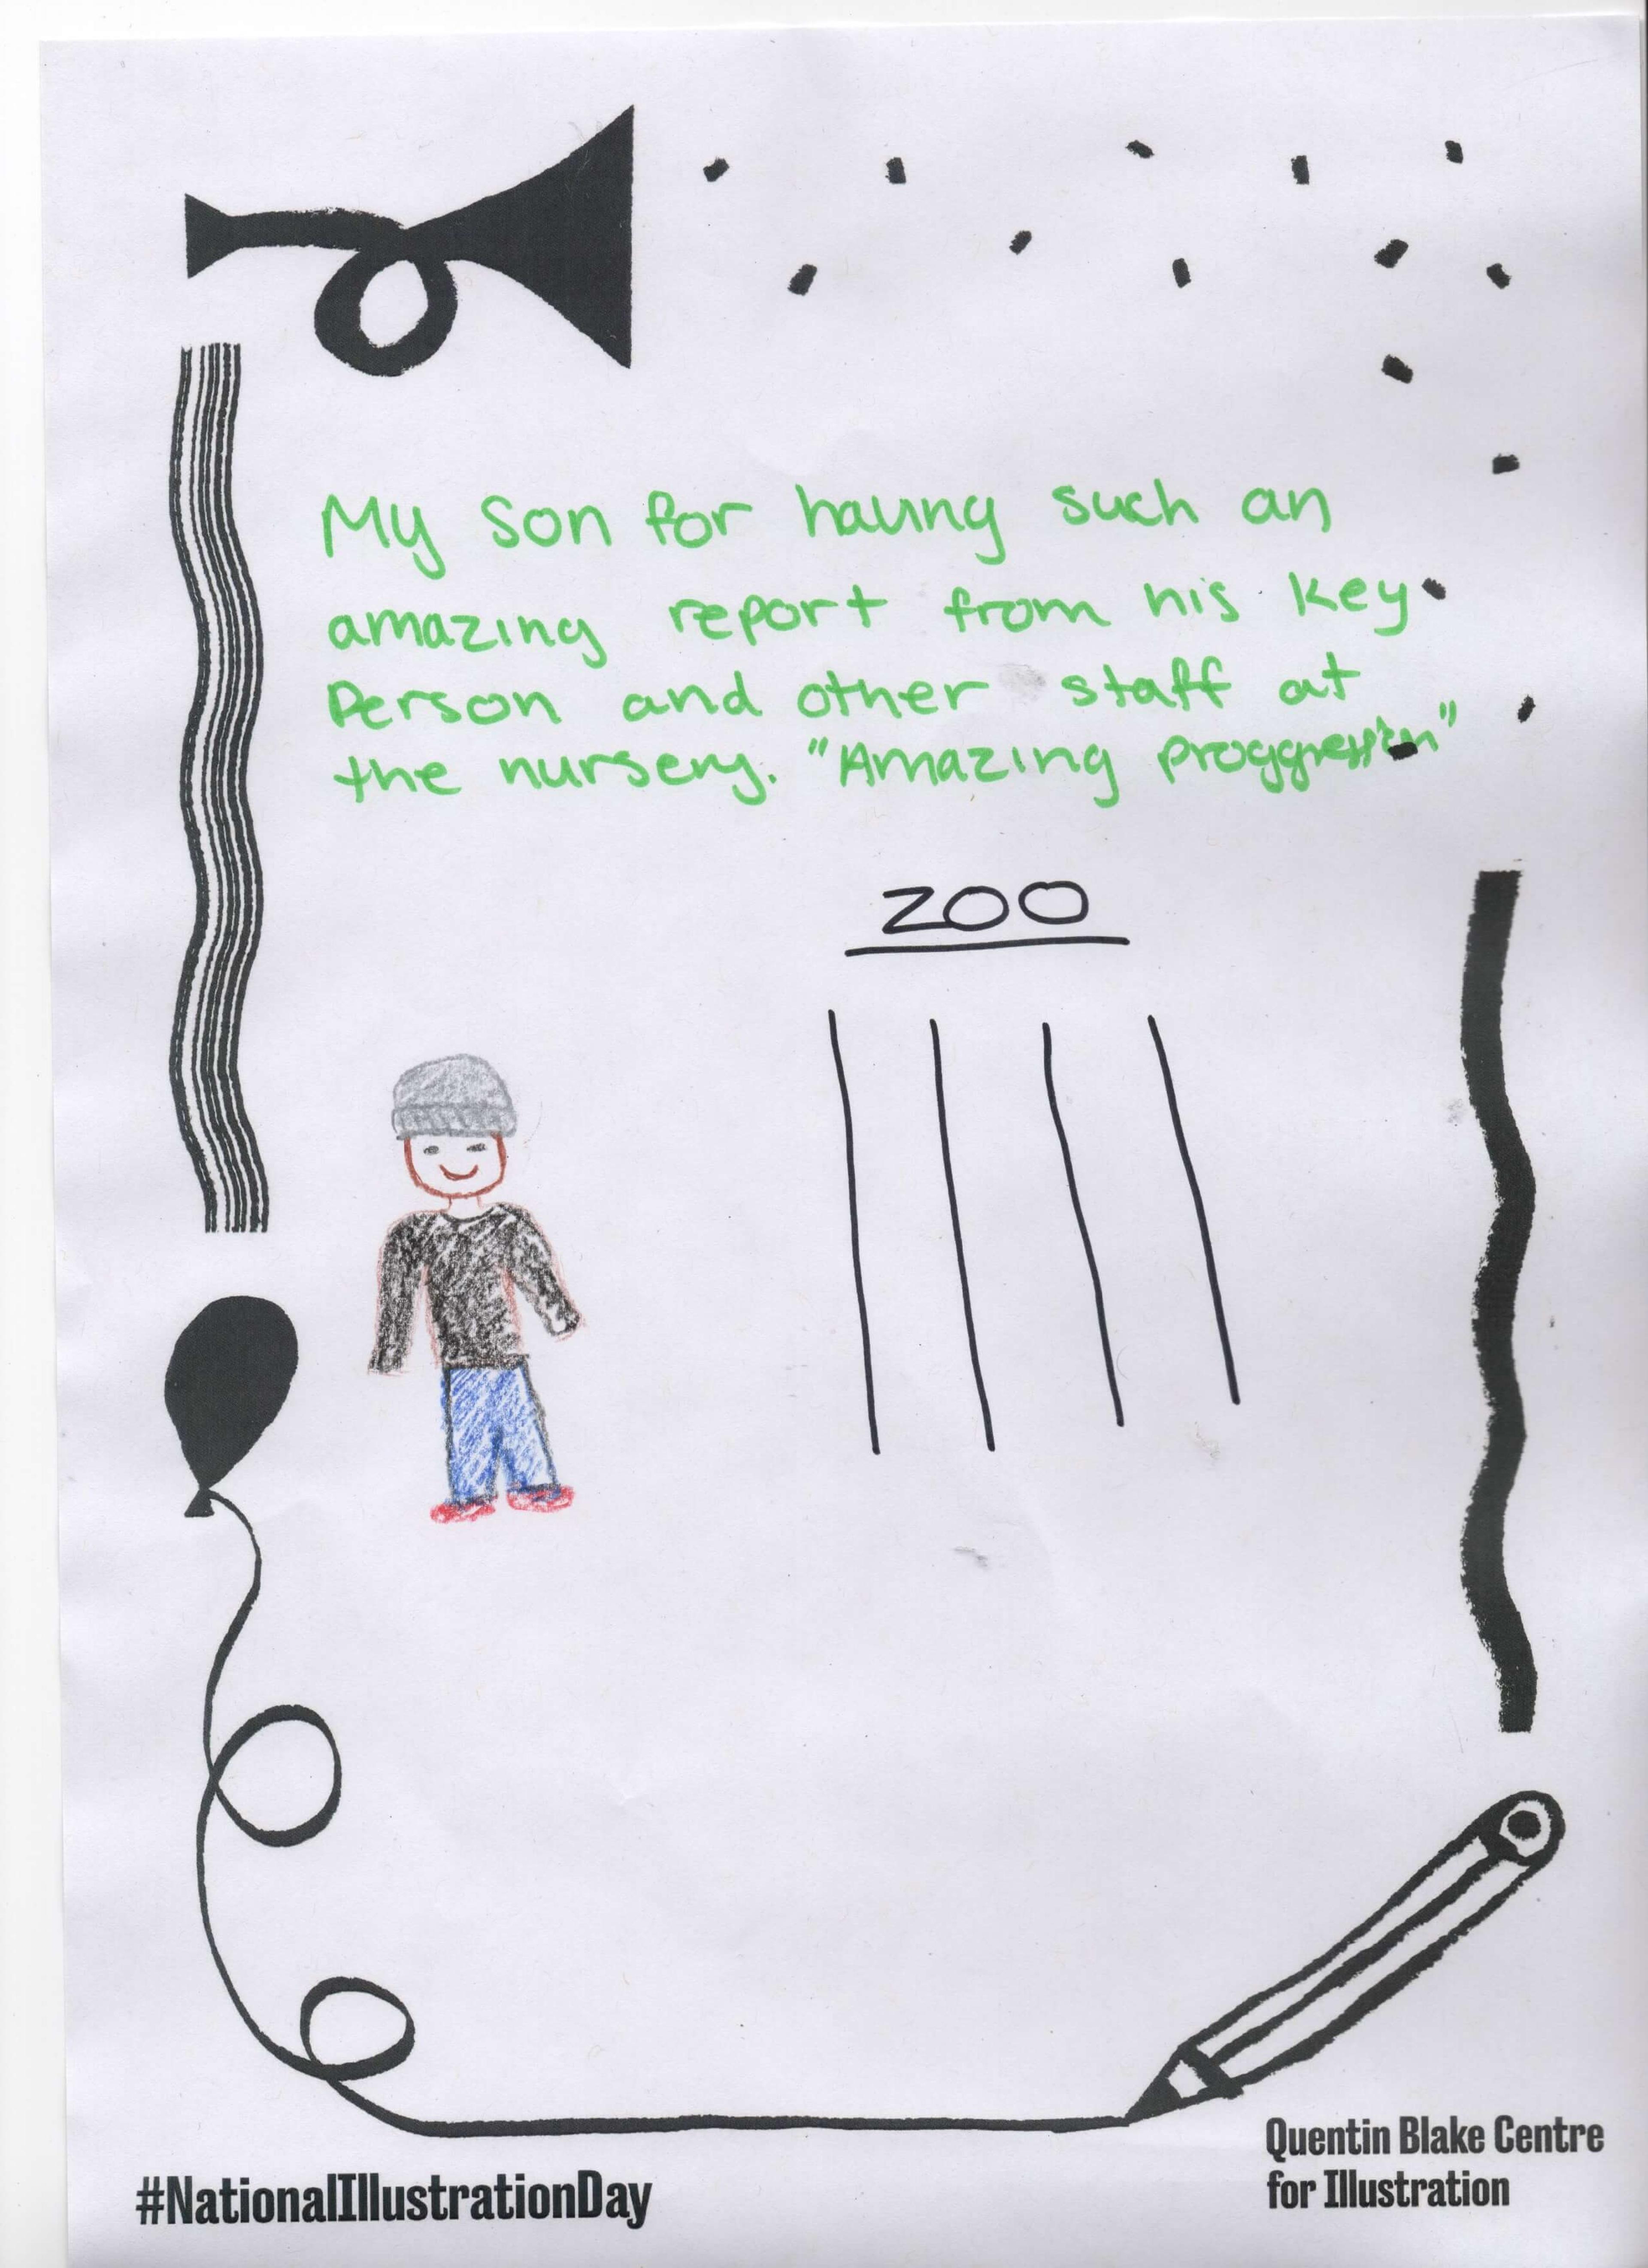 Drawing of a child with a gray beanie hat stood next to the word "zoo". There is a description written in green that reads: "My son for having an amazing report from his key person and other staff at the nursery. 'Amazing progress'."